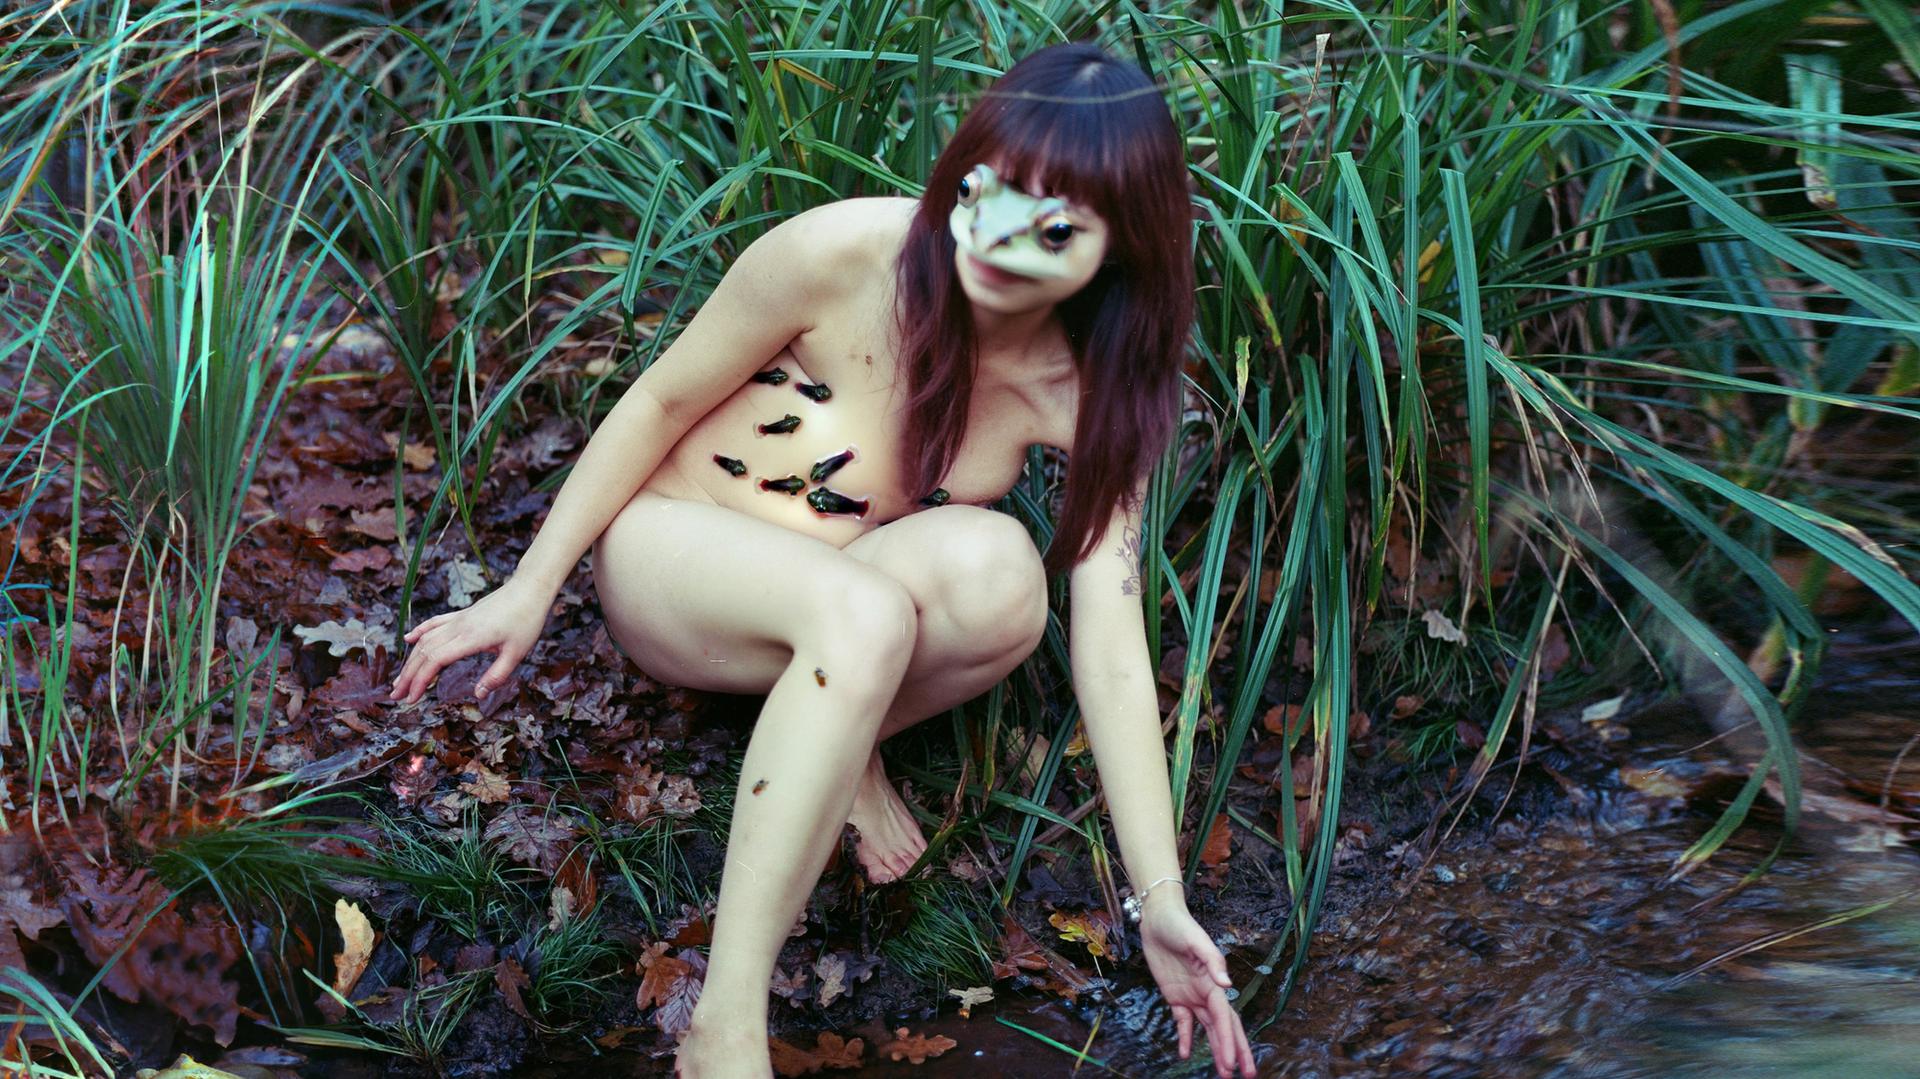 Photo of nude woman in grass with frog face superimposed on hers